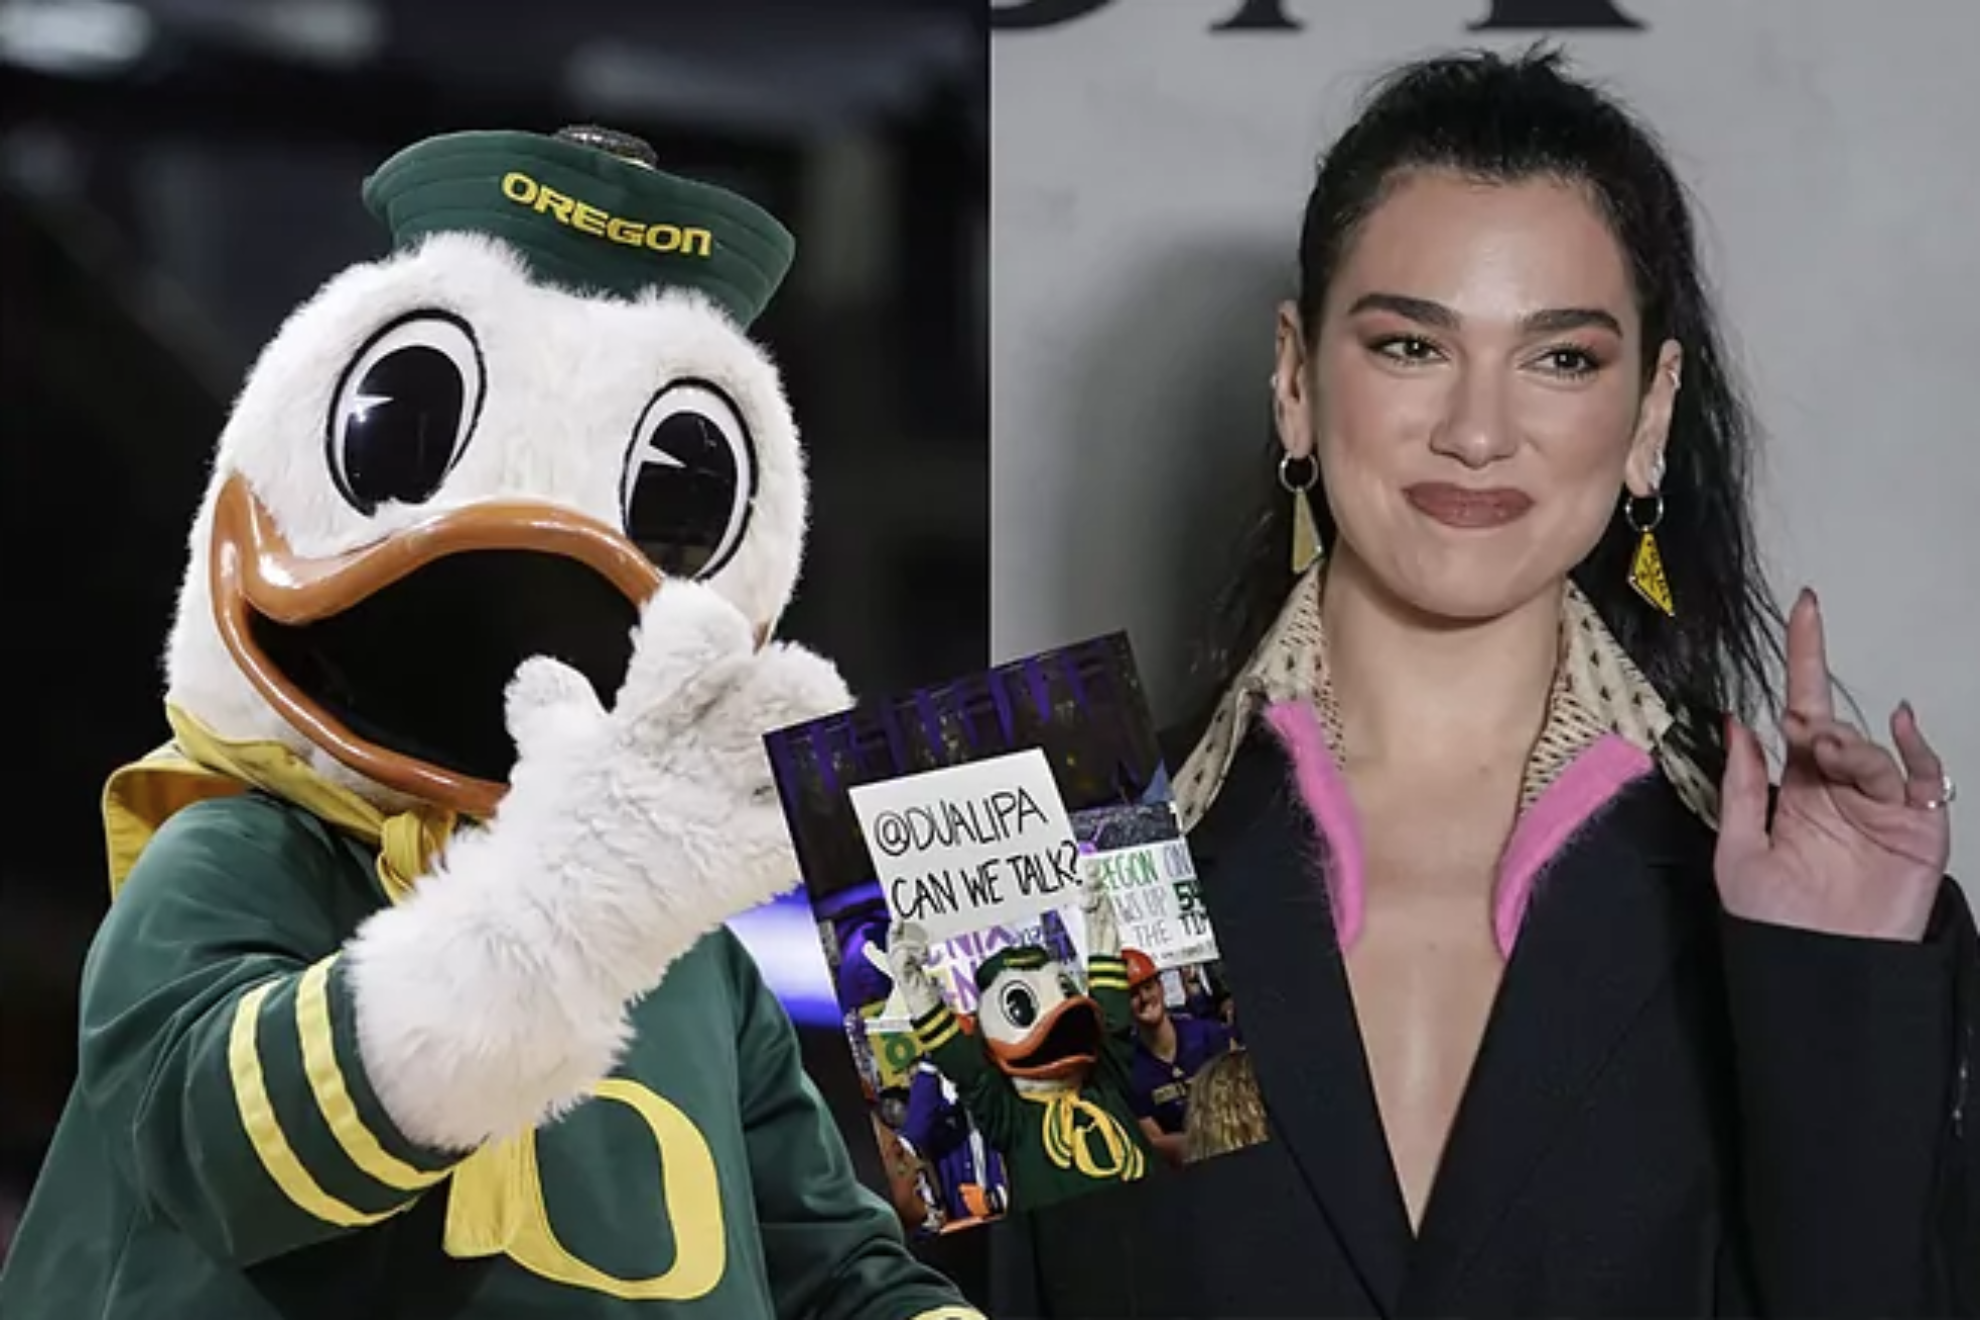 Oregon Ducks mascot goes all out in attempt to woo Dua Lipa